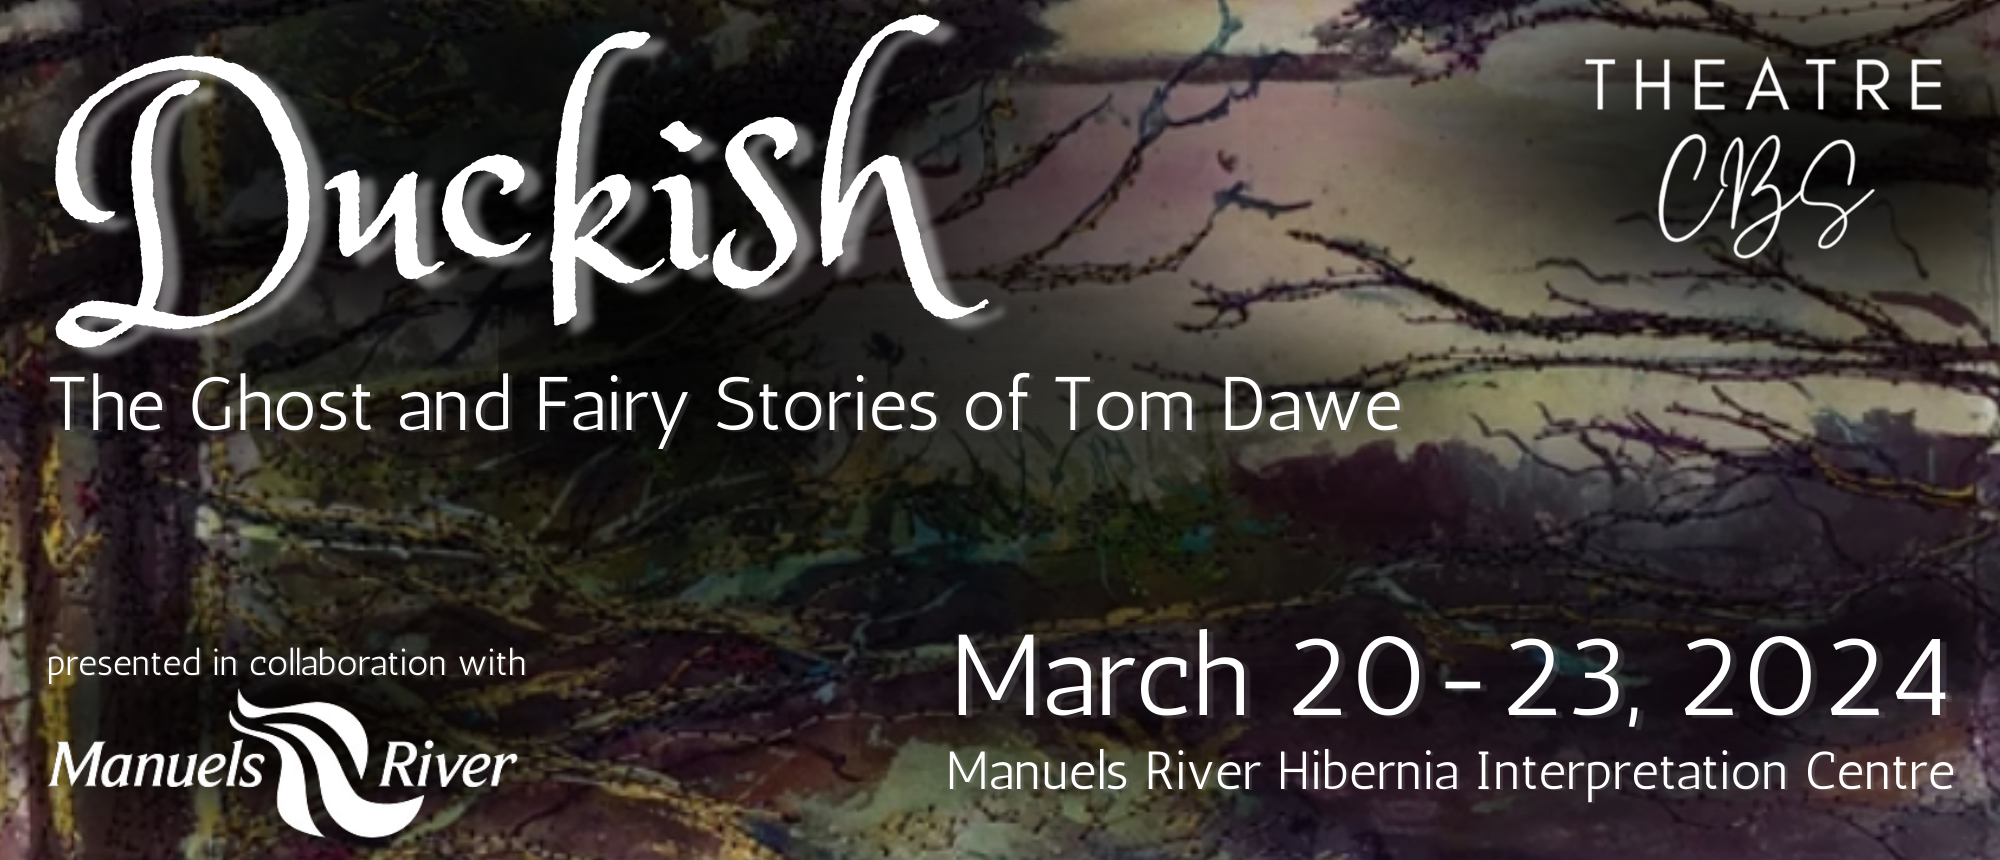 Duckish: The Ghost and Fairy Stories of Tom Dawe